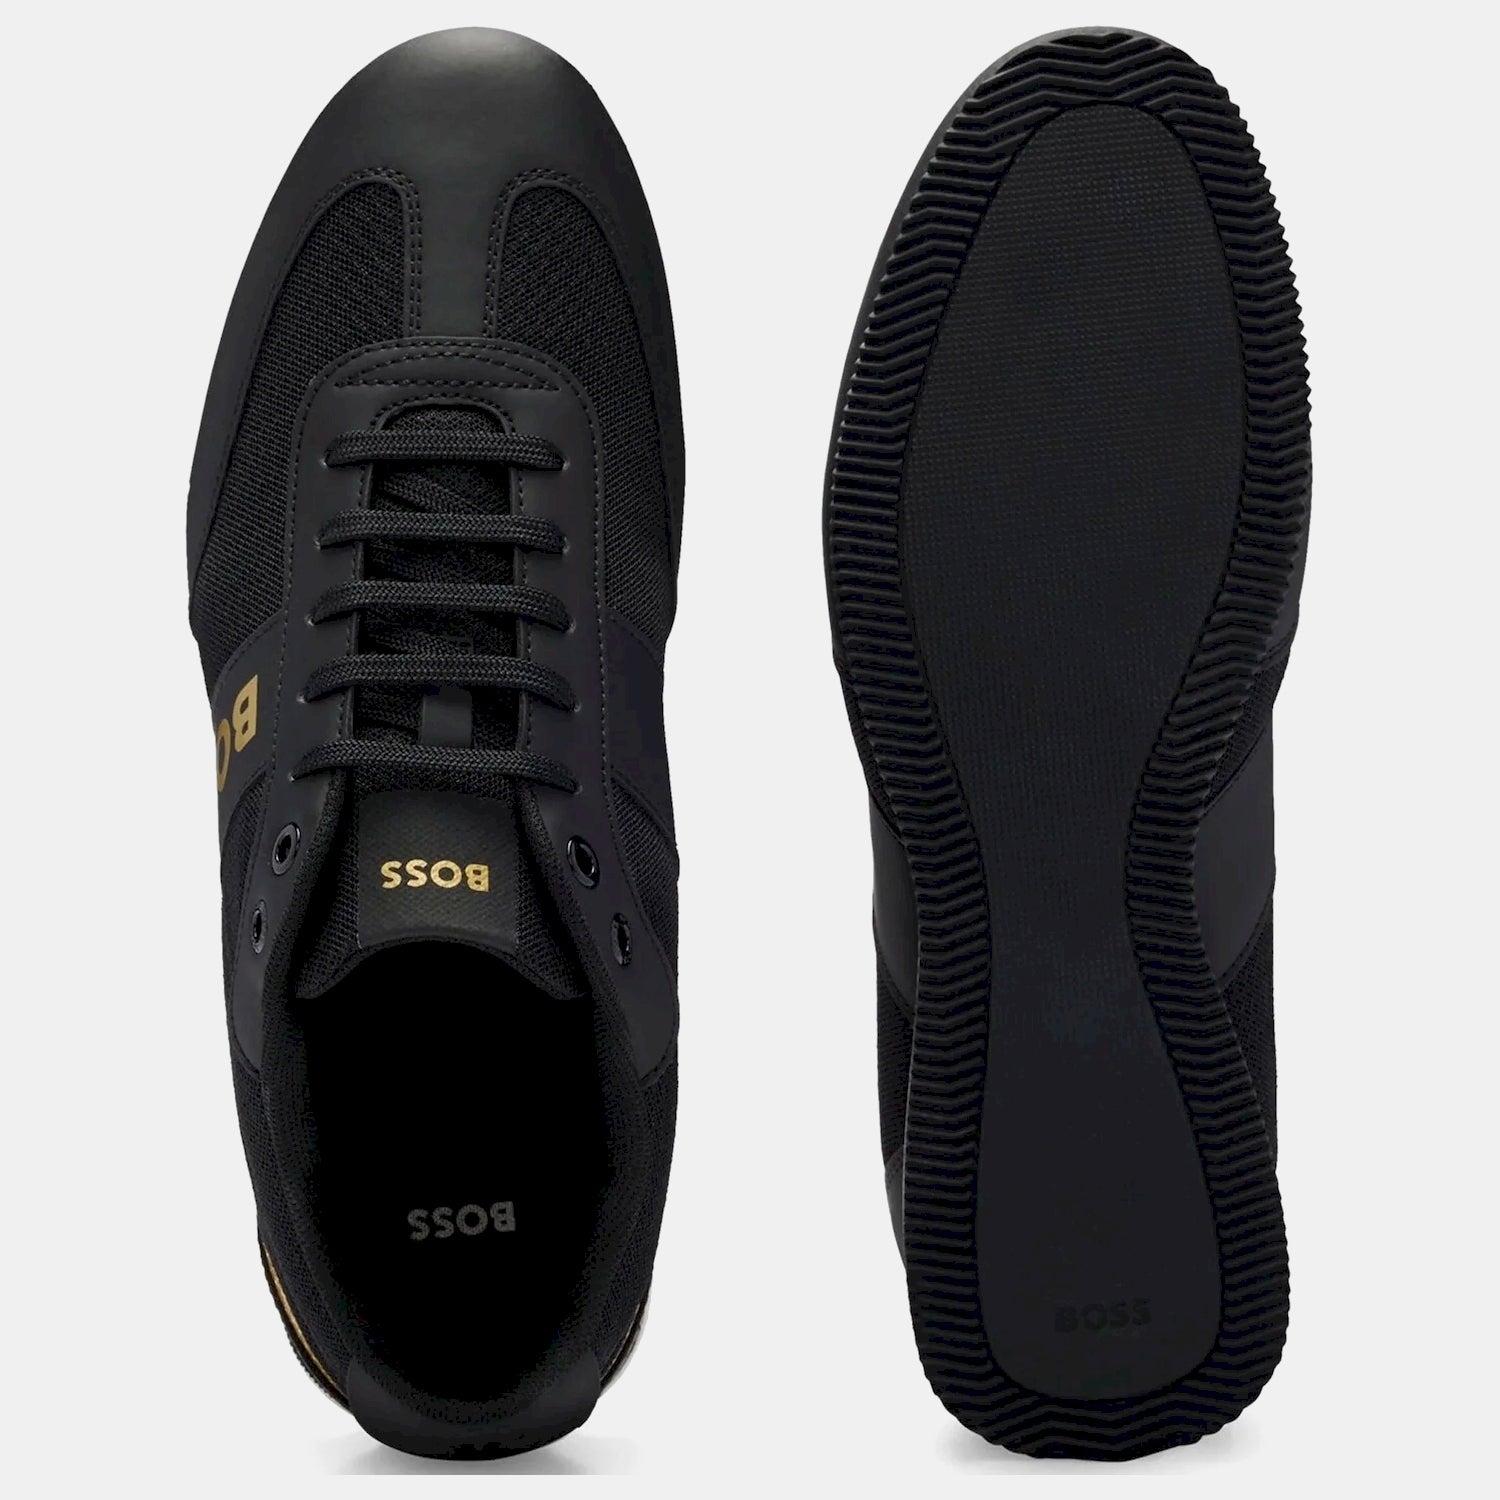 Boss Sapatilhas Sneakers Shoes Rusham Lowp Mx Blk Gold Preto Ouro_shot3